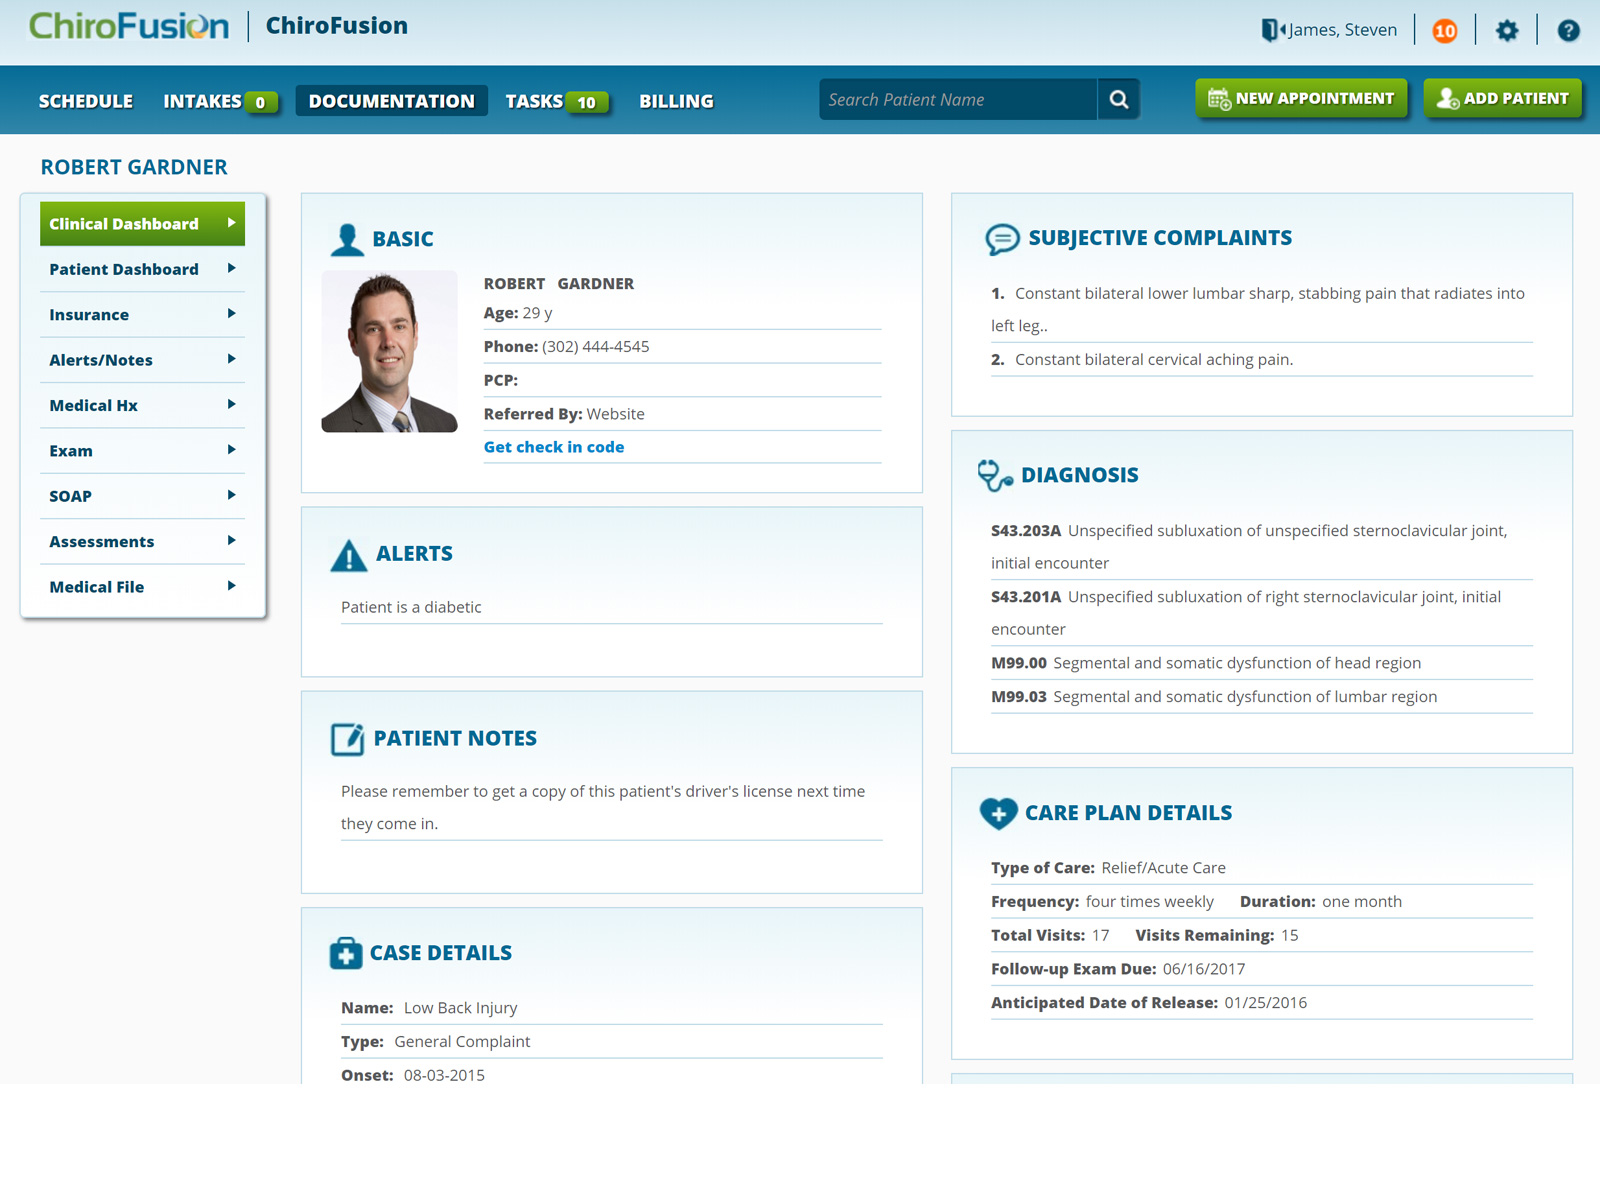 ChiroFusion clinical dashboard